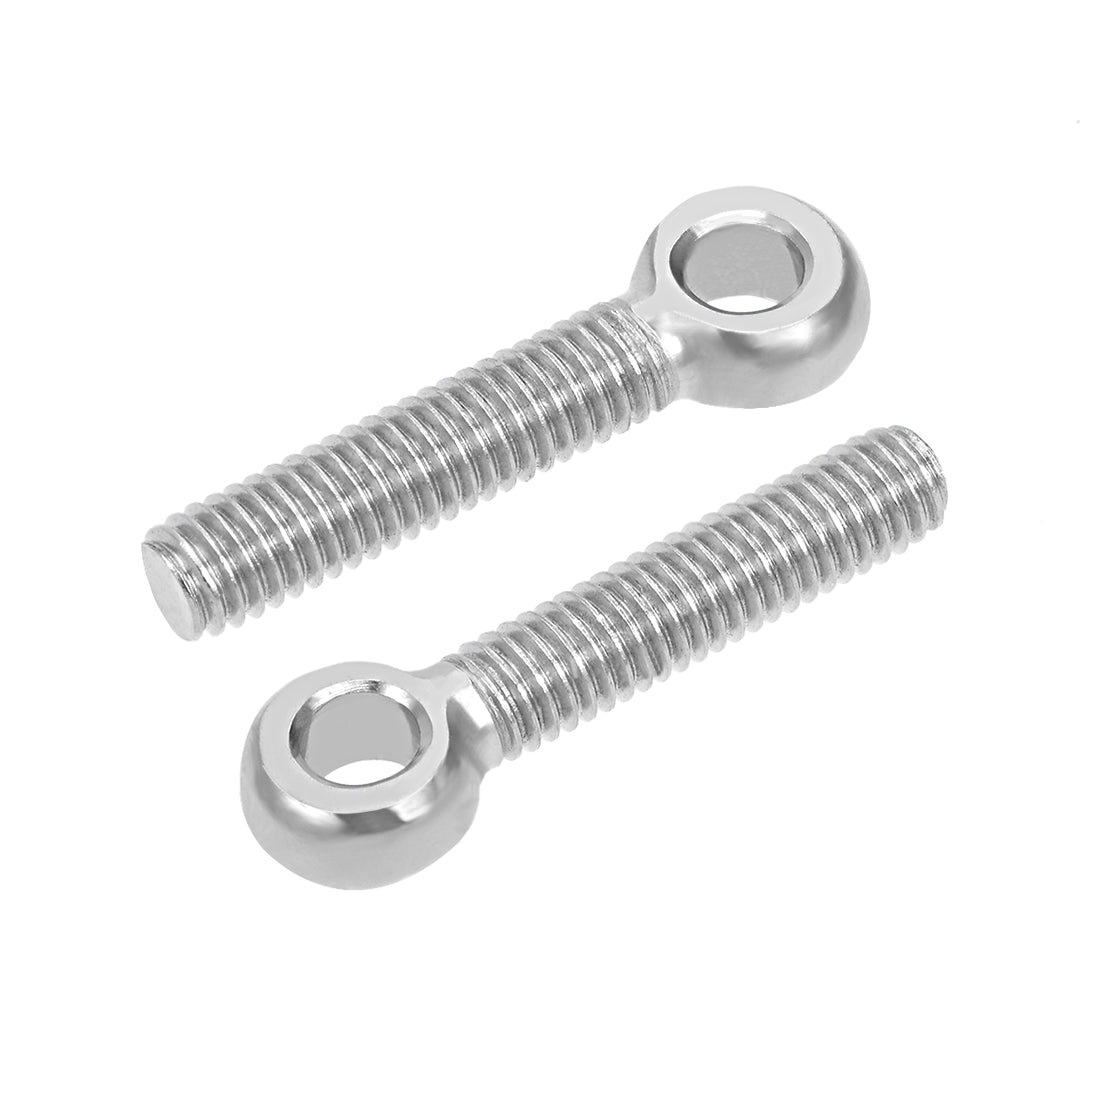 uxcell Uxcell M x mm 304 Stainless Steel Machine Lift Eye Bolt Rigging 10pcs